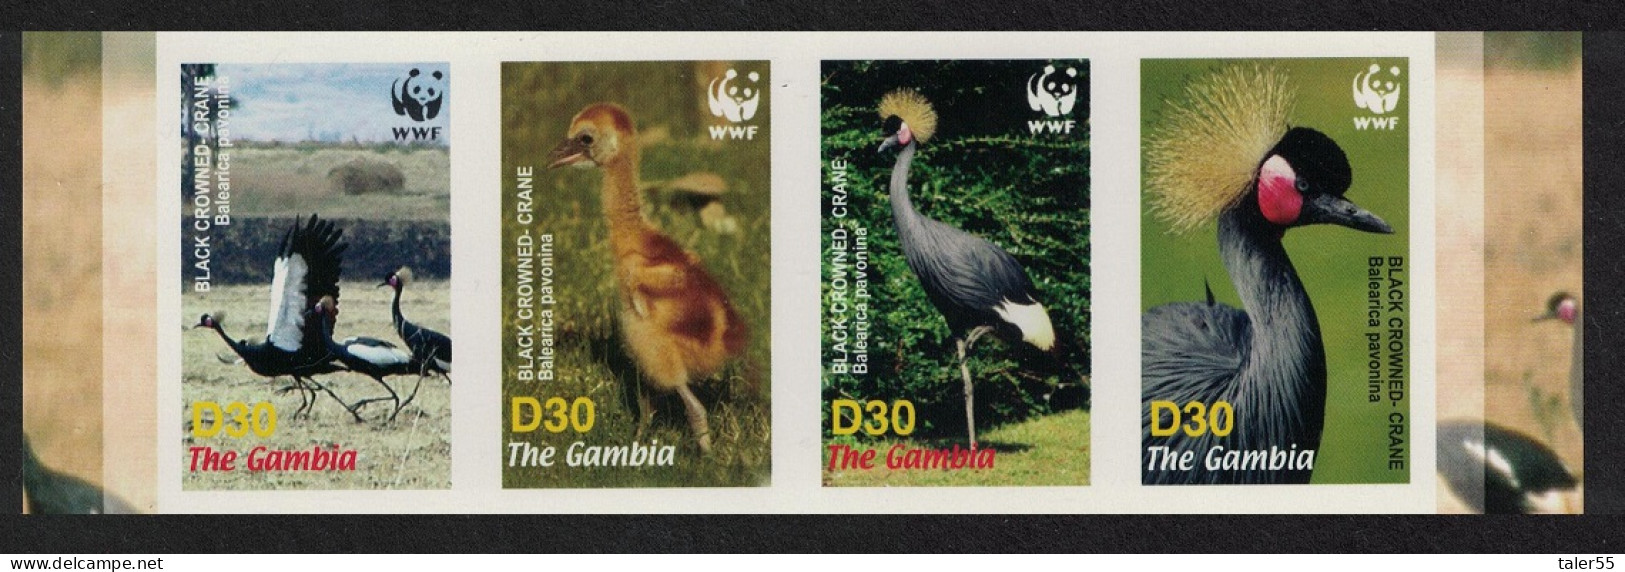 Gambia Birds WWF Black Crowned Crane Strip Of 4v Imperf 2006 MNH SG#4920-4923 MI#5631-5634 Sc#3014 A-d - Gambie (1965-...)